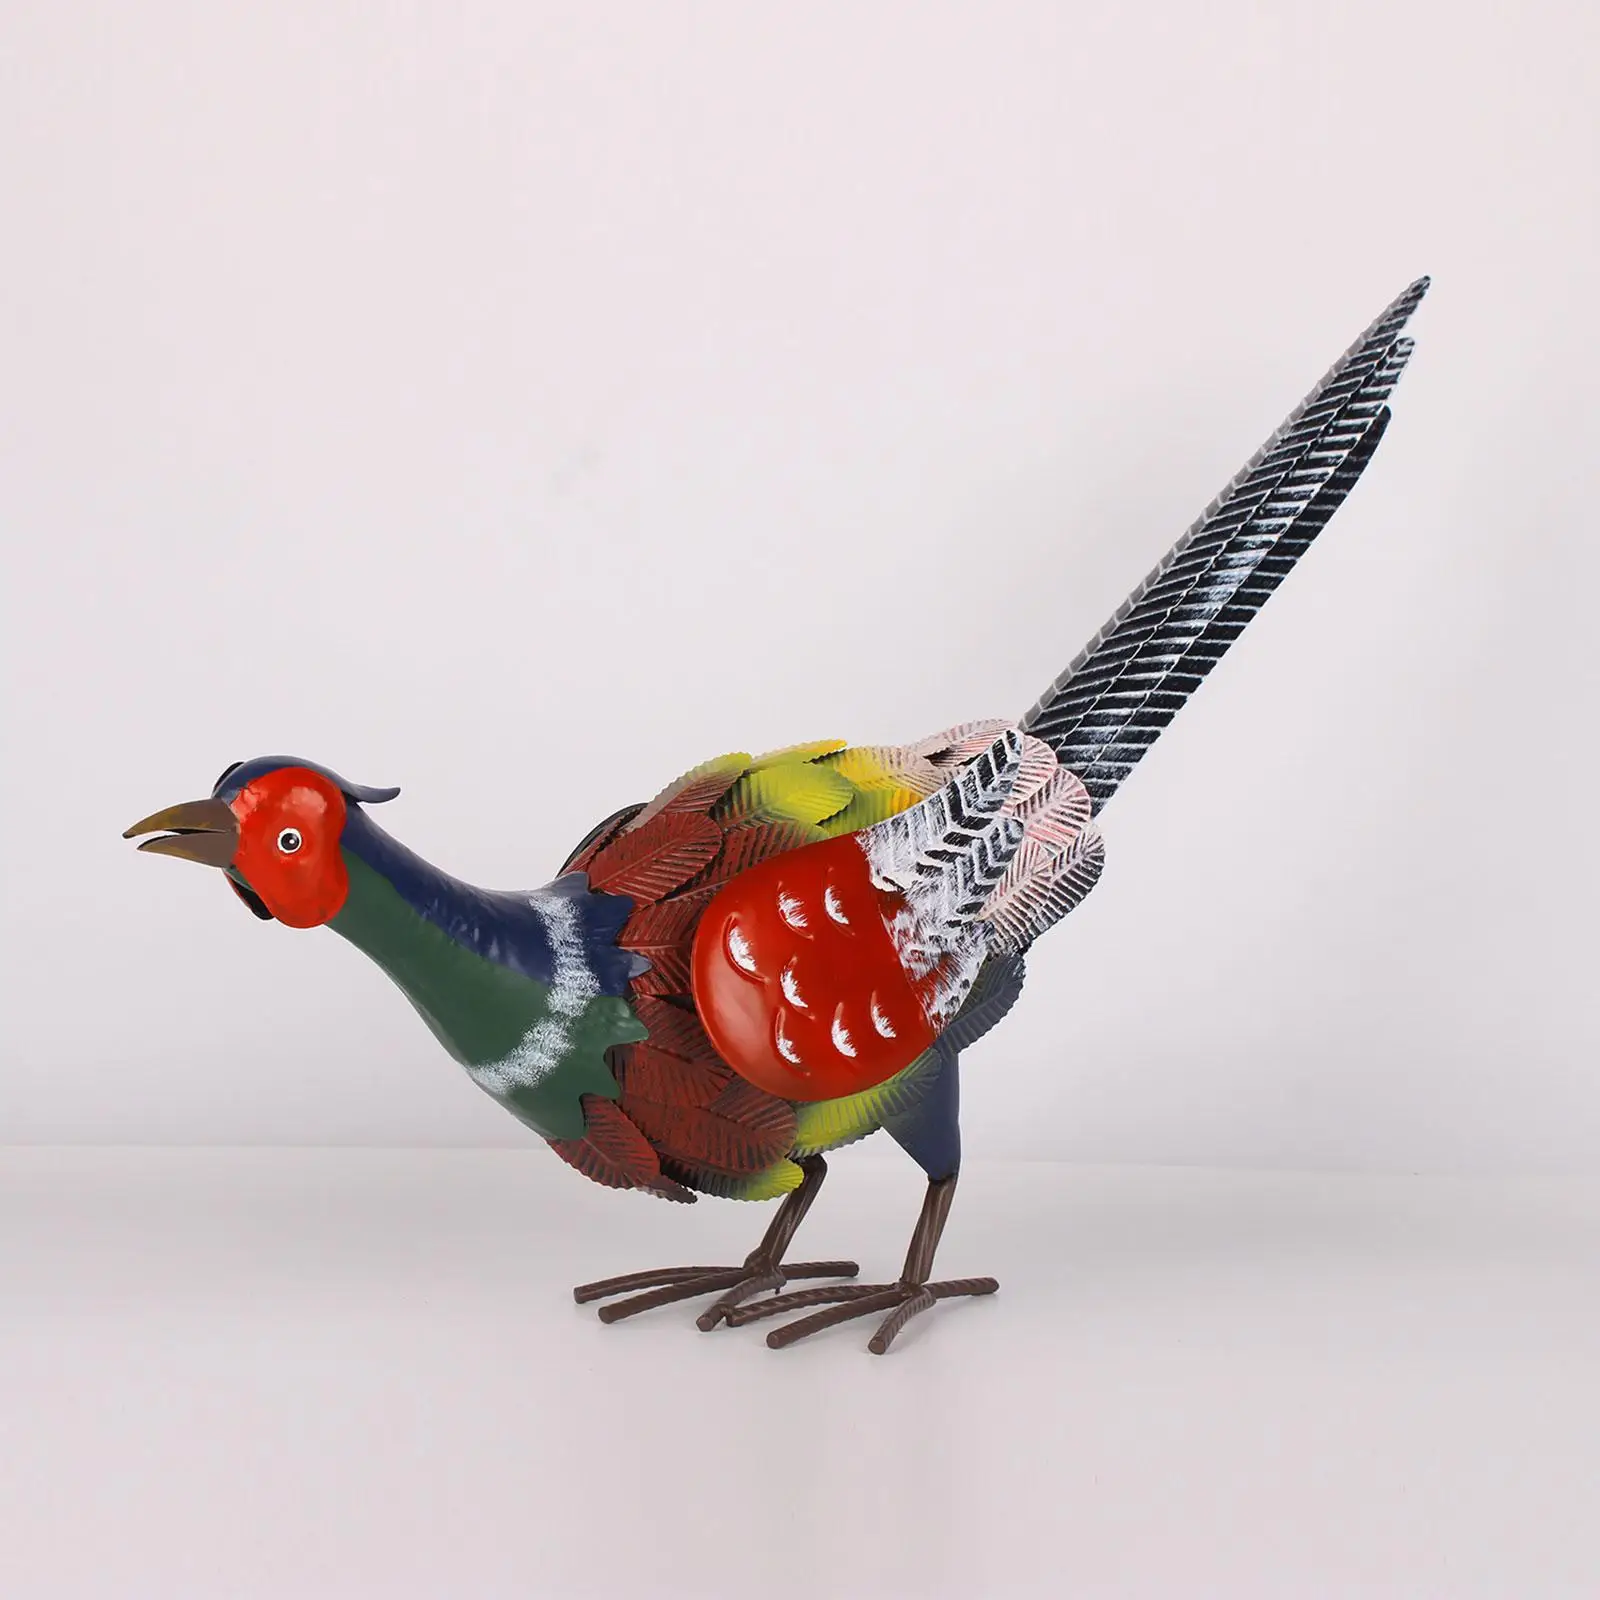 Colorful Metal Pheasant Garden Statue Decor 26x7x7.8inch Realistic Sturdy Handcrafted Hand Painted Decorative Outdoor Decoration